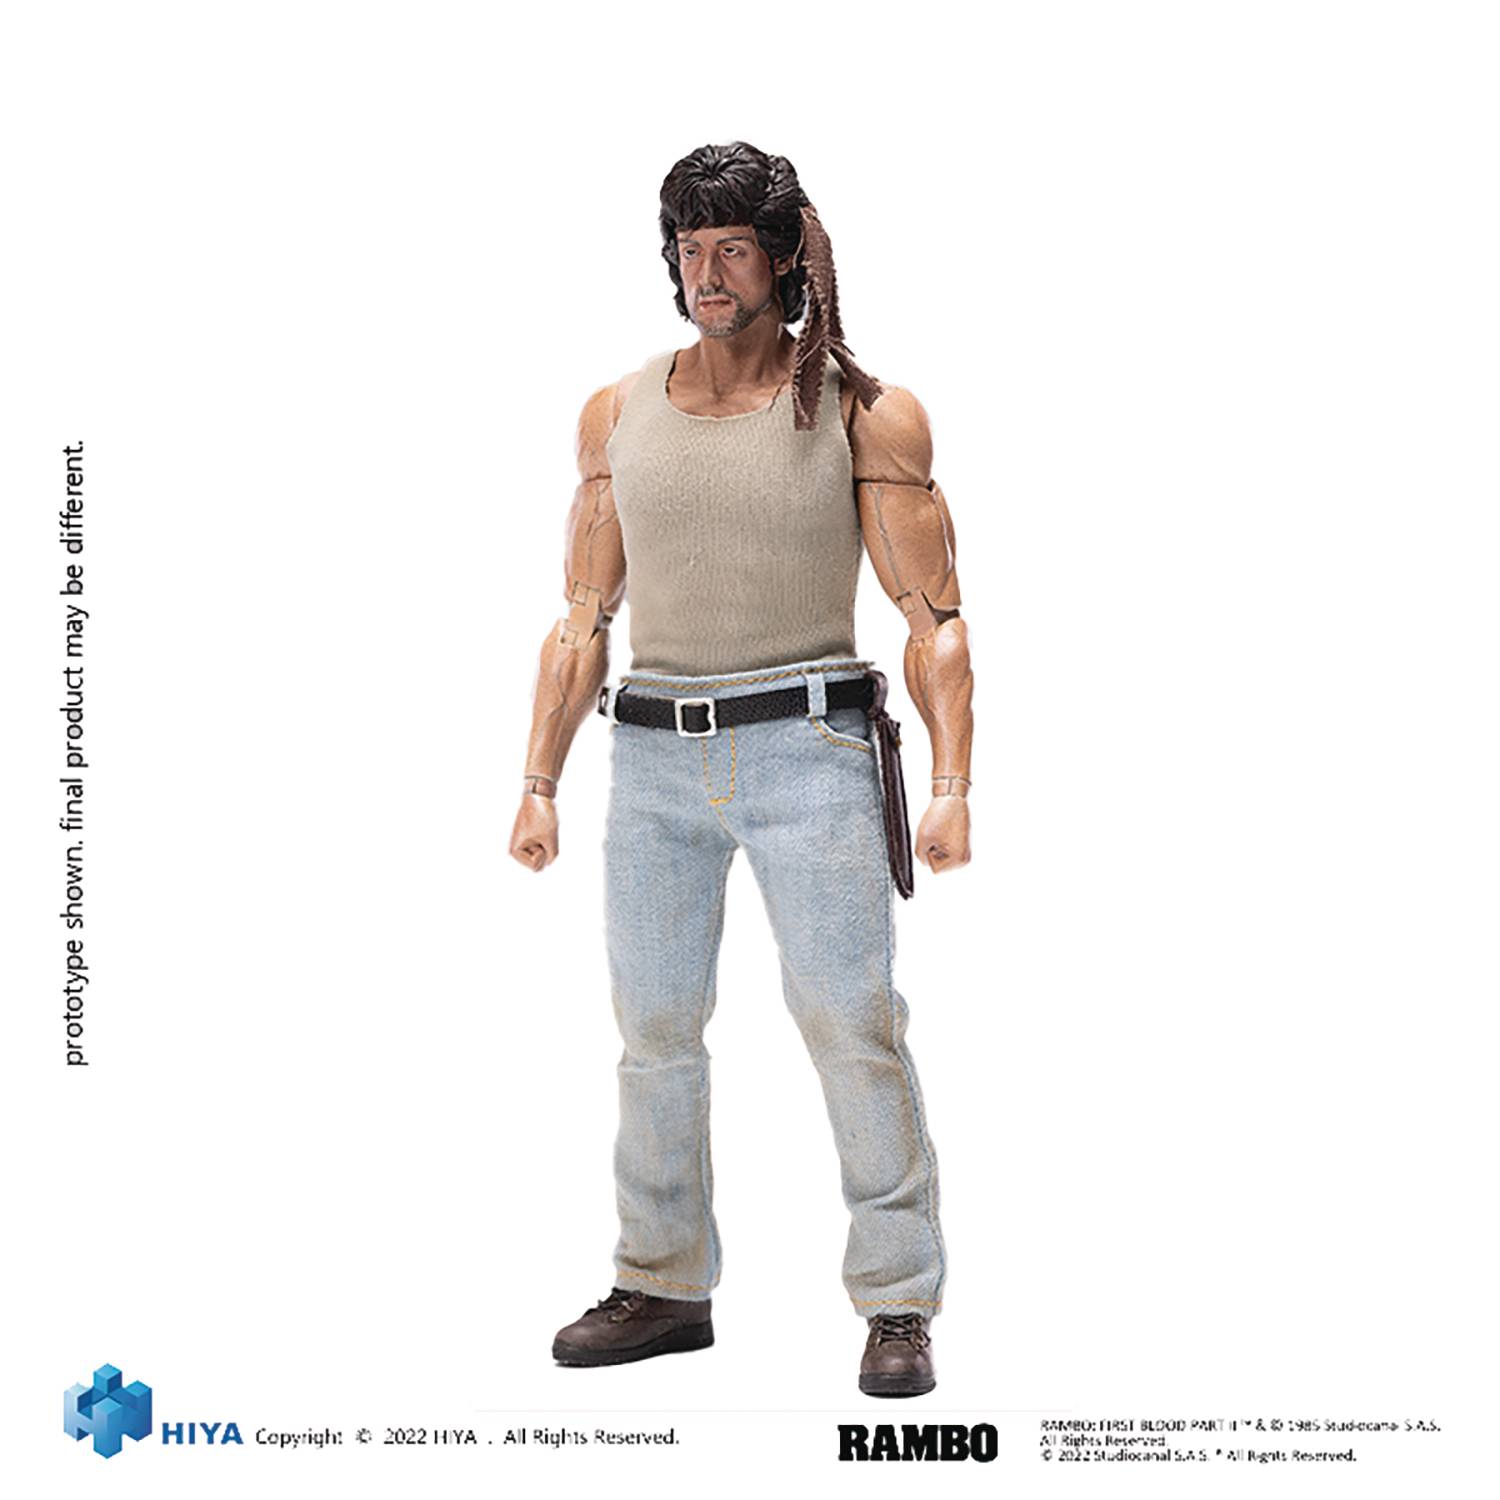 RAMBO FIRST BLOOD EXQUISITE SUPER SERIES PX 1/12 AF